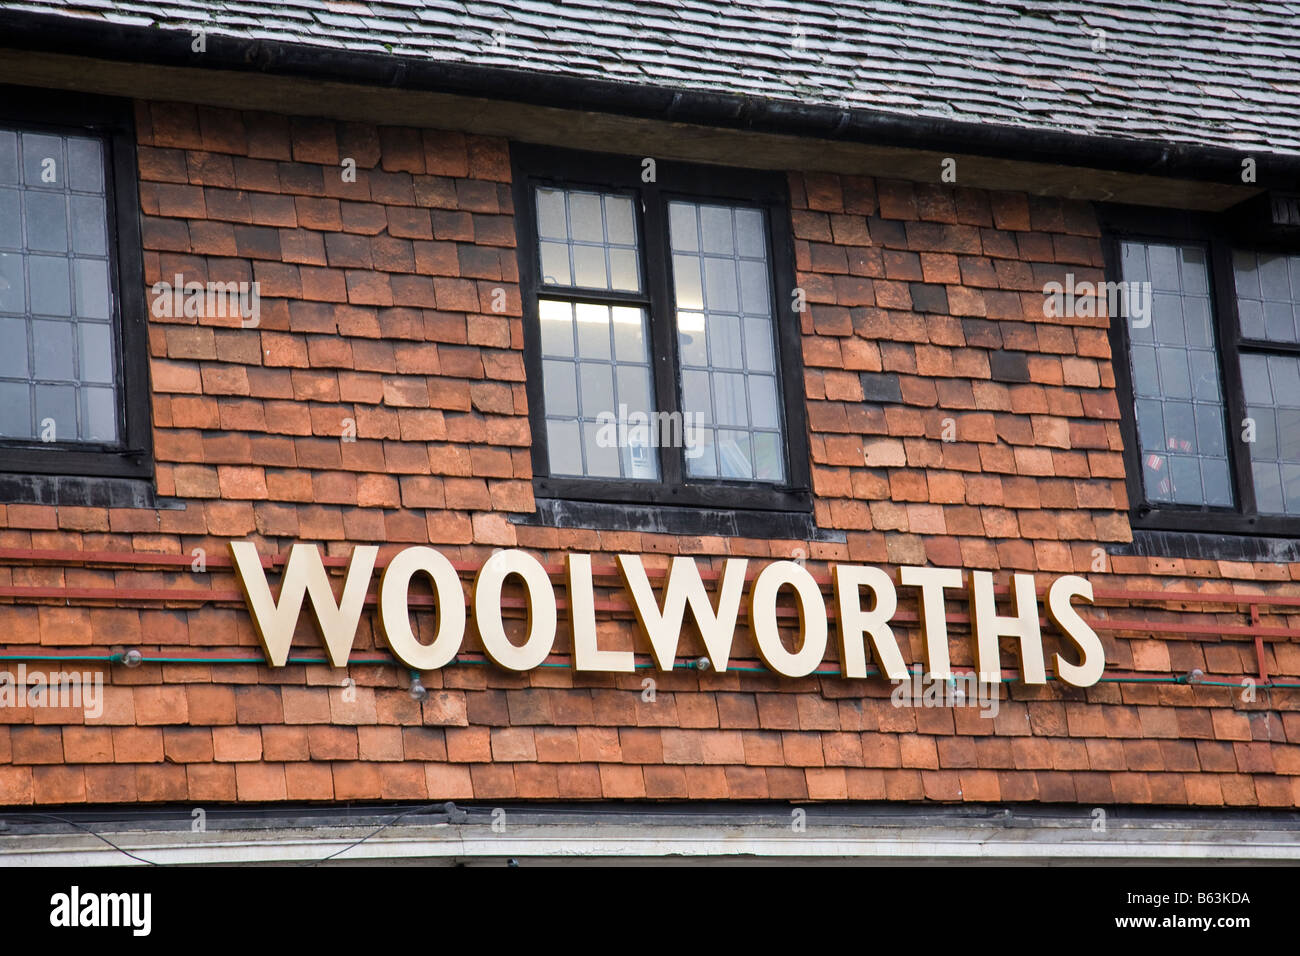 Part of a Woolworths shop front showing the rare gold coloured signage, Haslemere, Surrey, England. Stock Photo